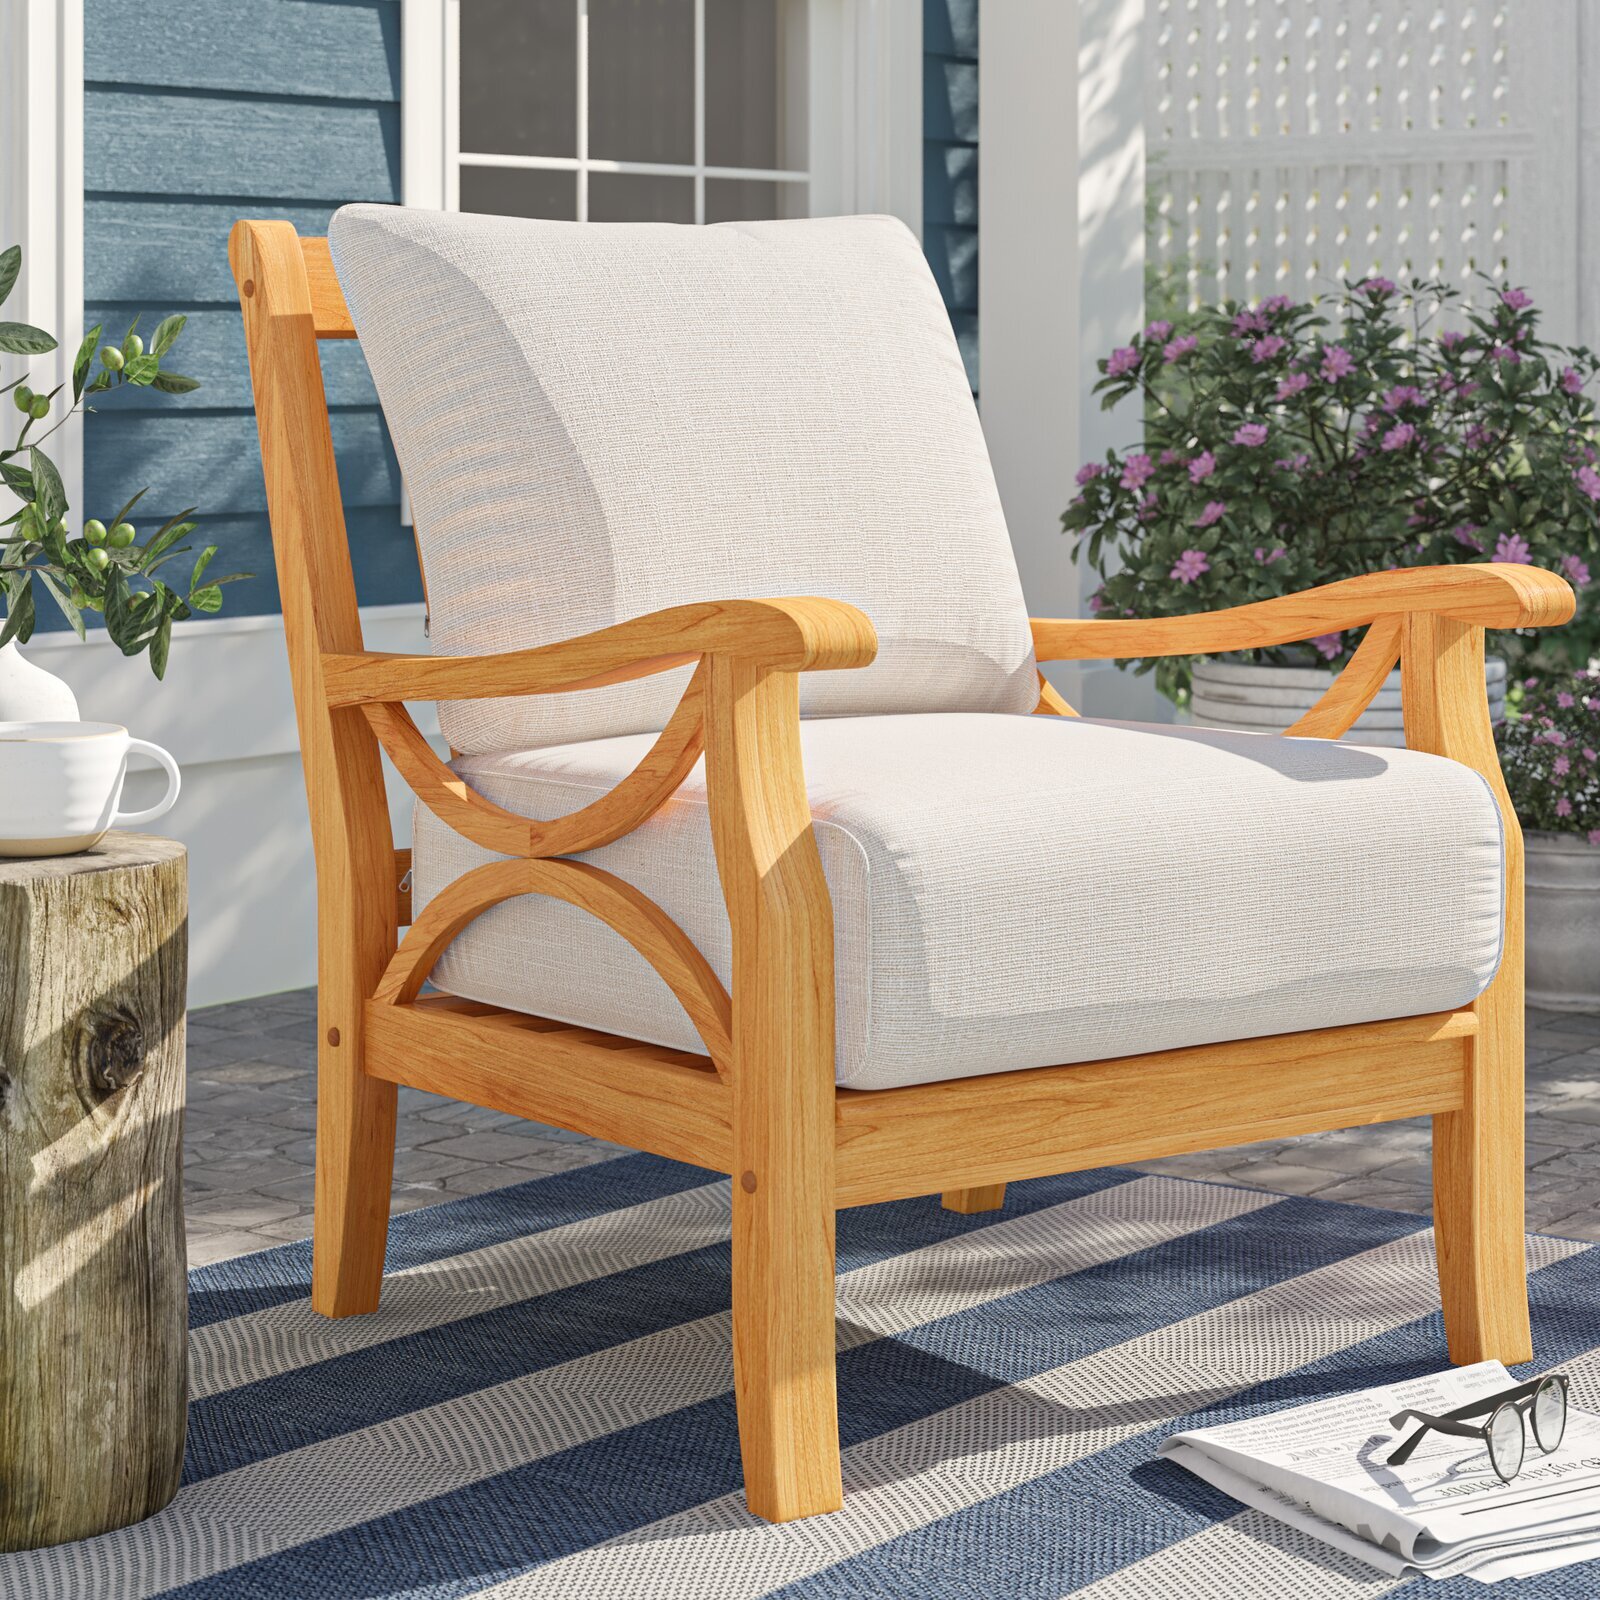 Mid century teak chairs for patios